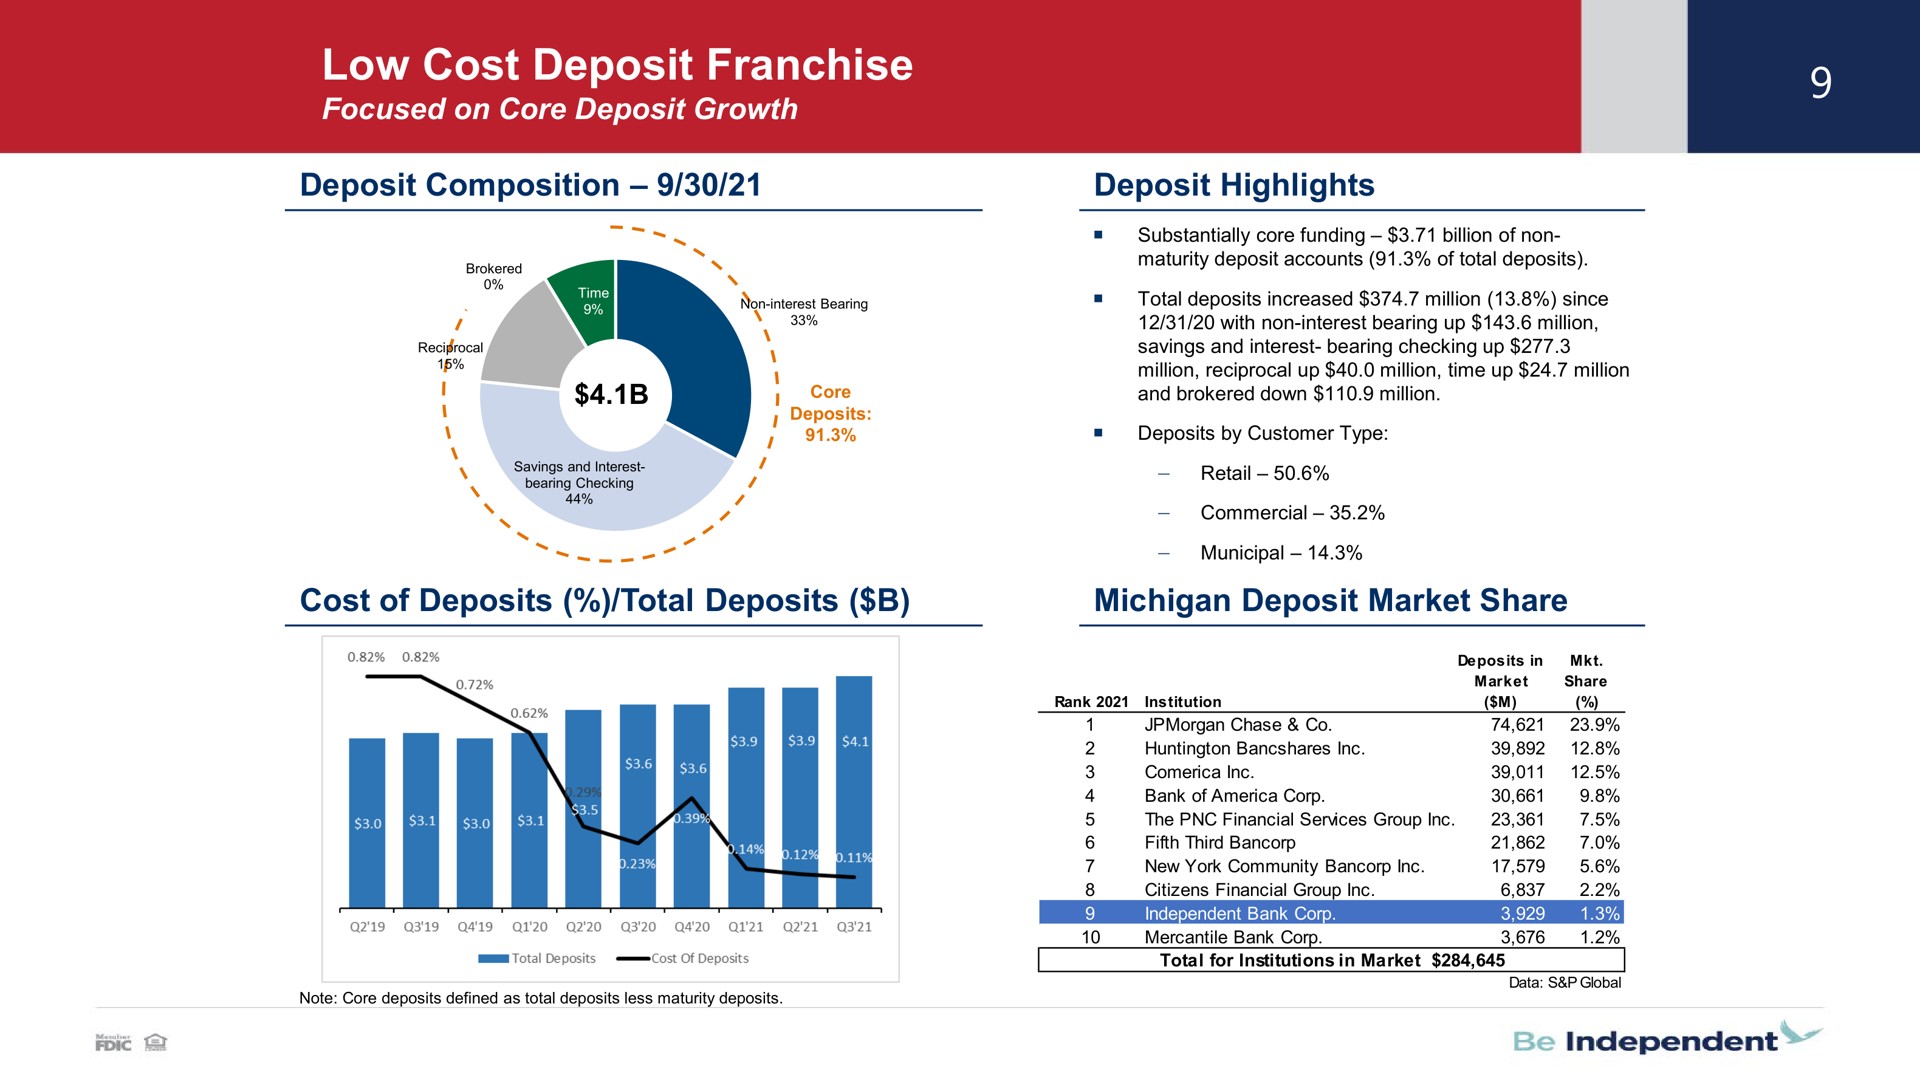 low cost deposit franchise i core | Independent Bank Corp